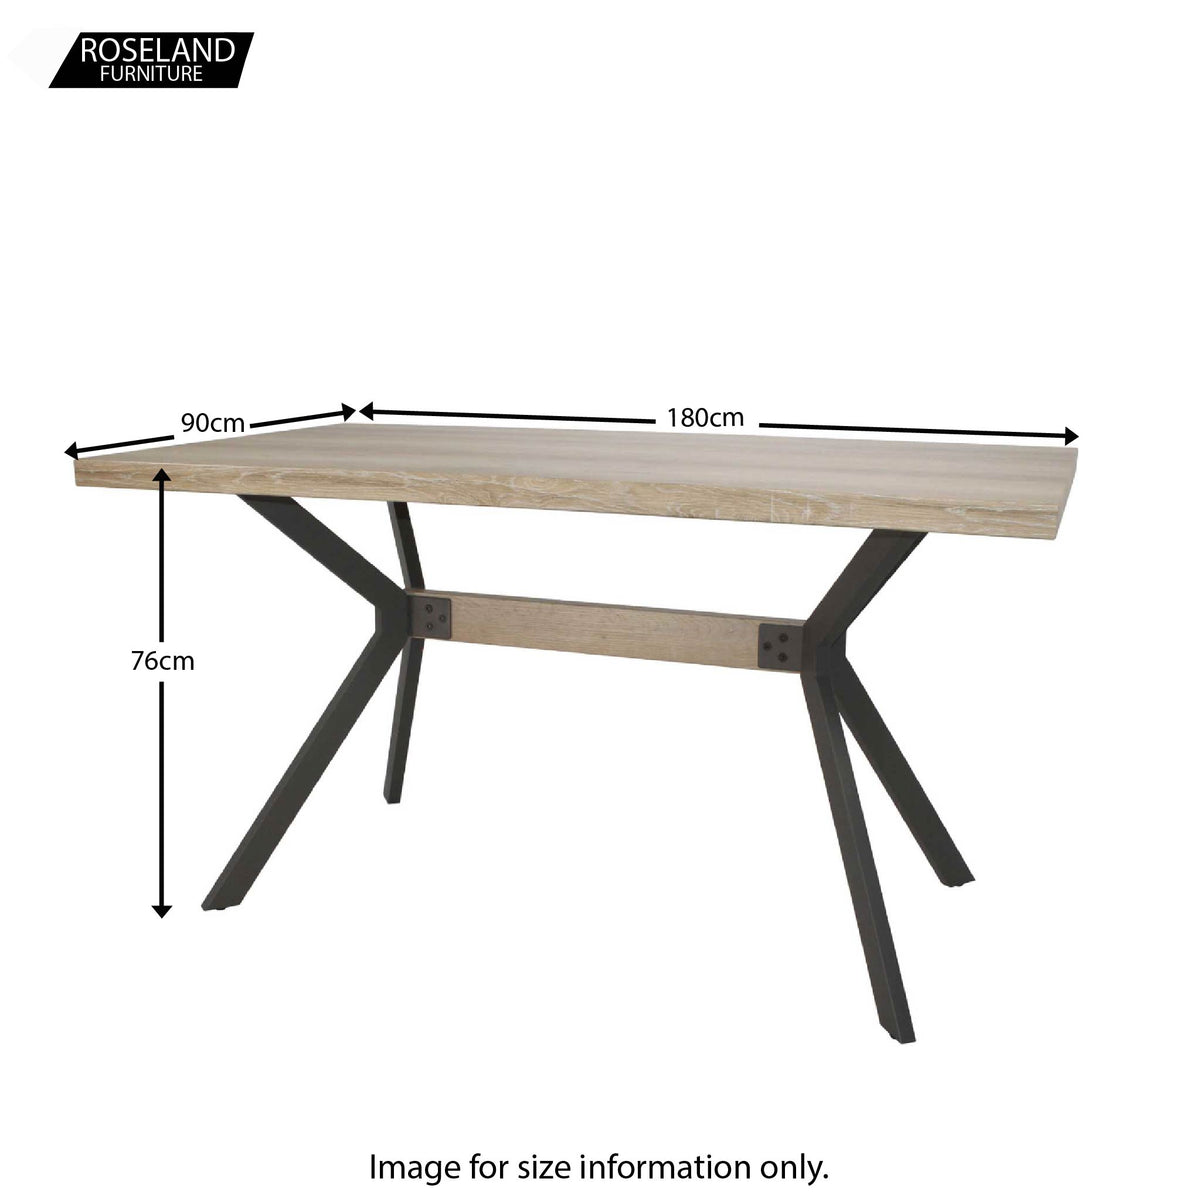 Allen 180cm Dining Table with Grey Steel Legs dimensions